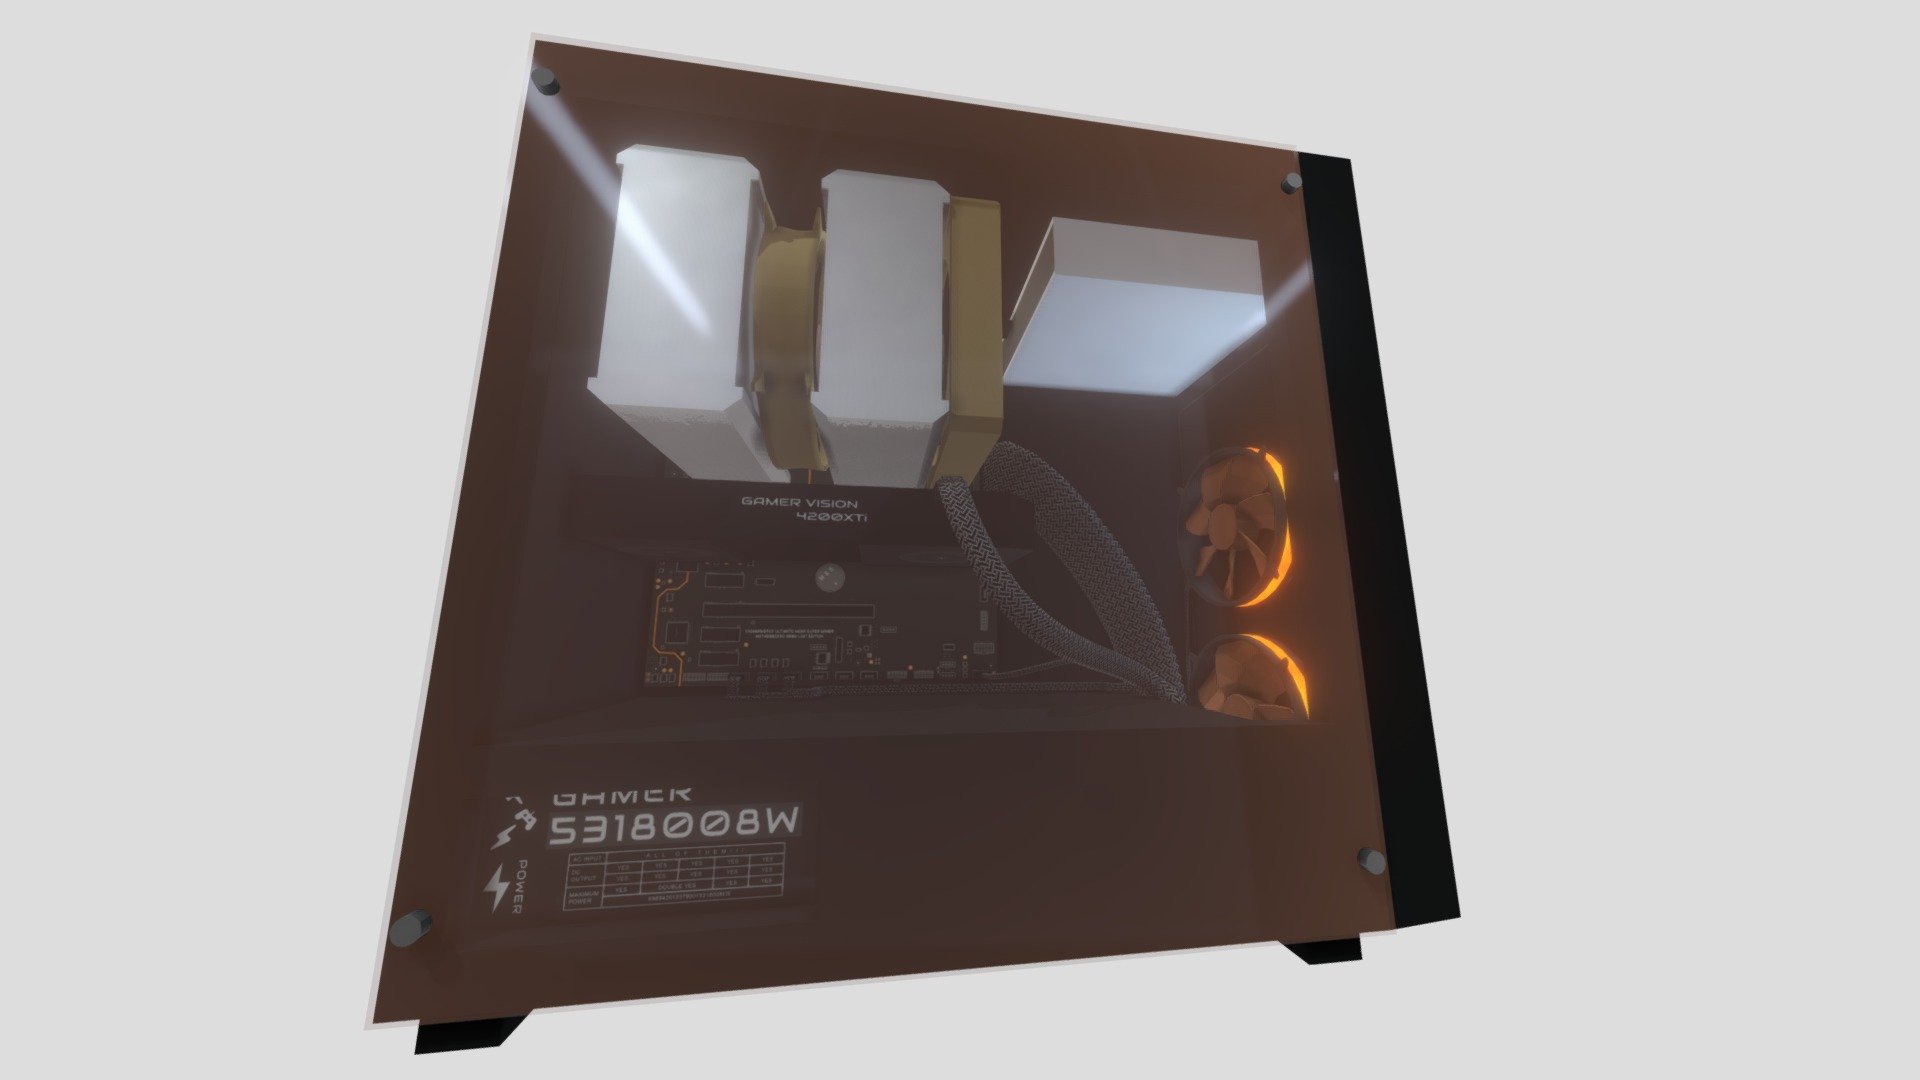 Designed to be metaverse ready and interactable, a gaming computer that has just enough detail to be an interesting prop in a virtual room.

Gaming jokes all included. Check the motherboard 3d model